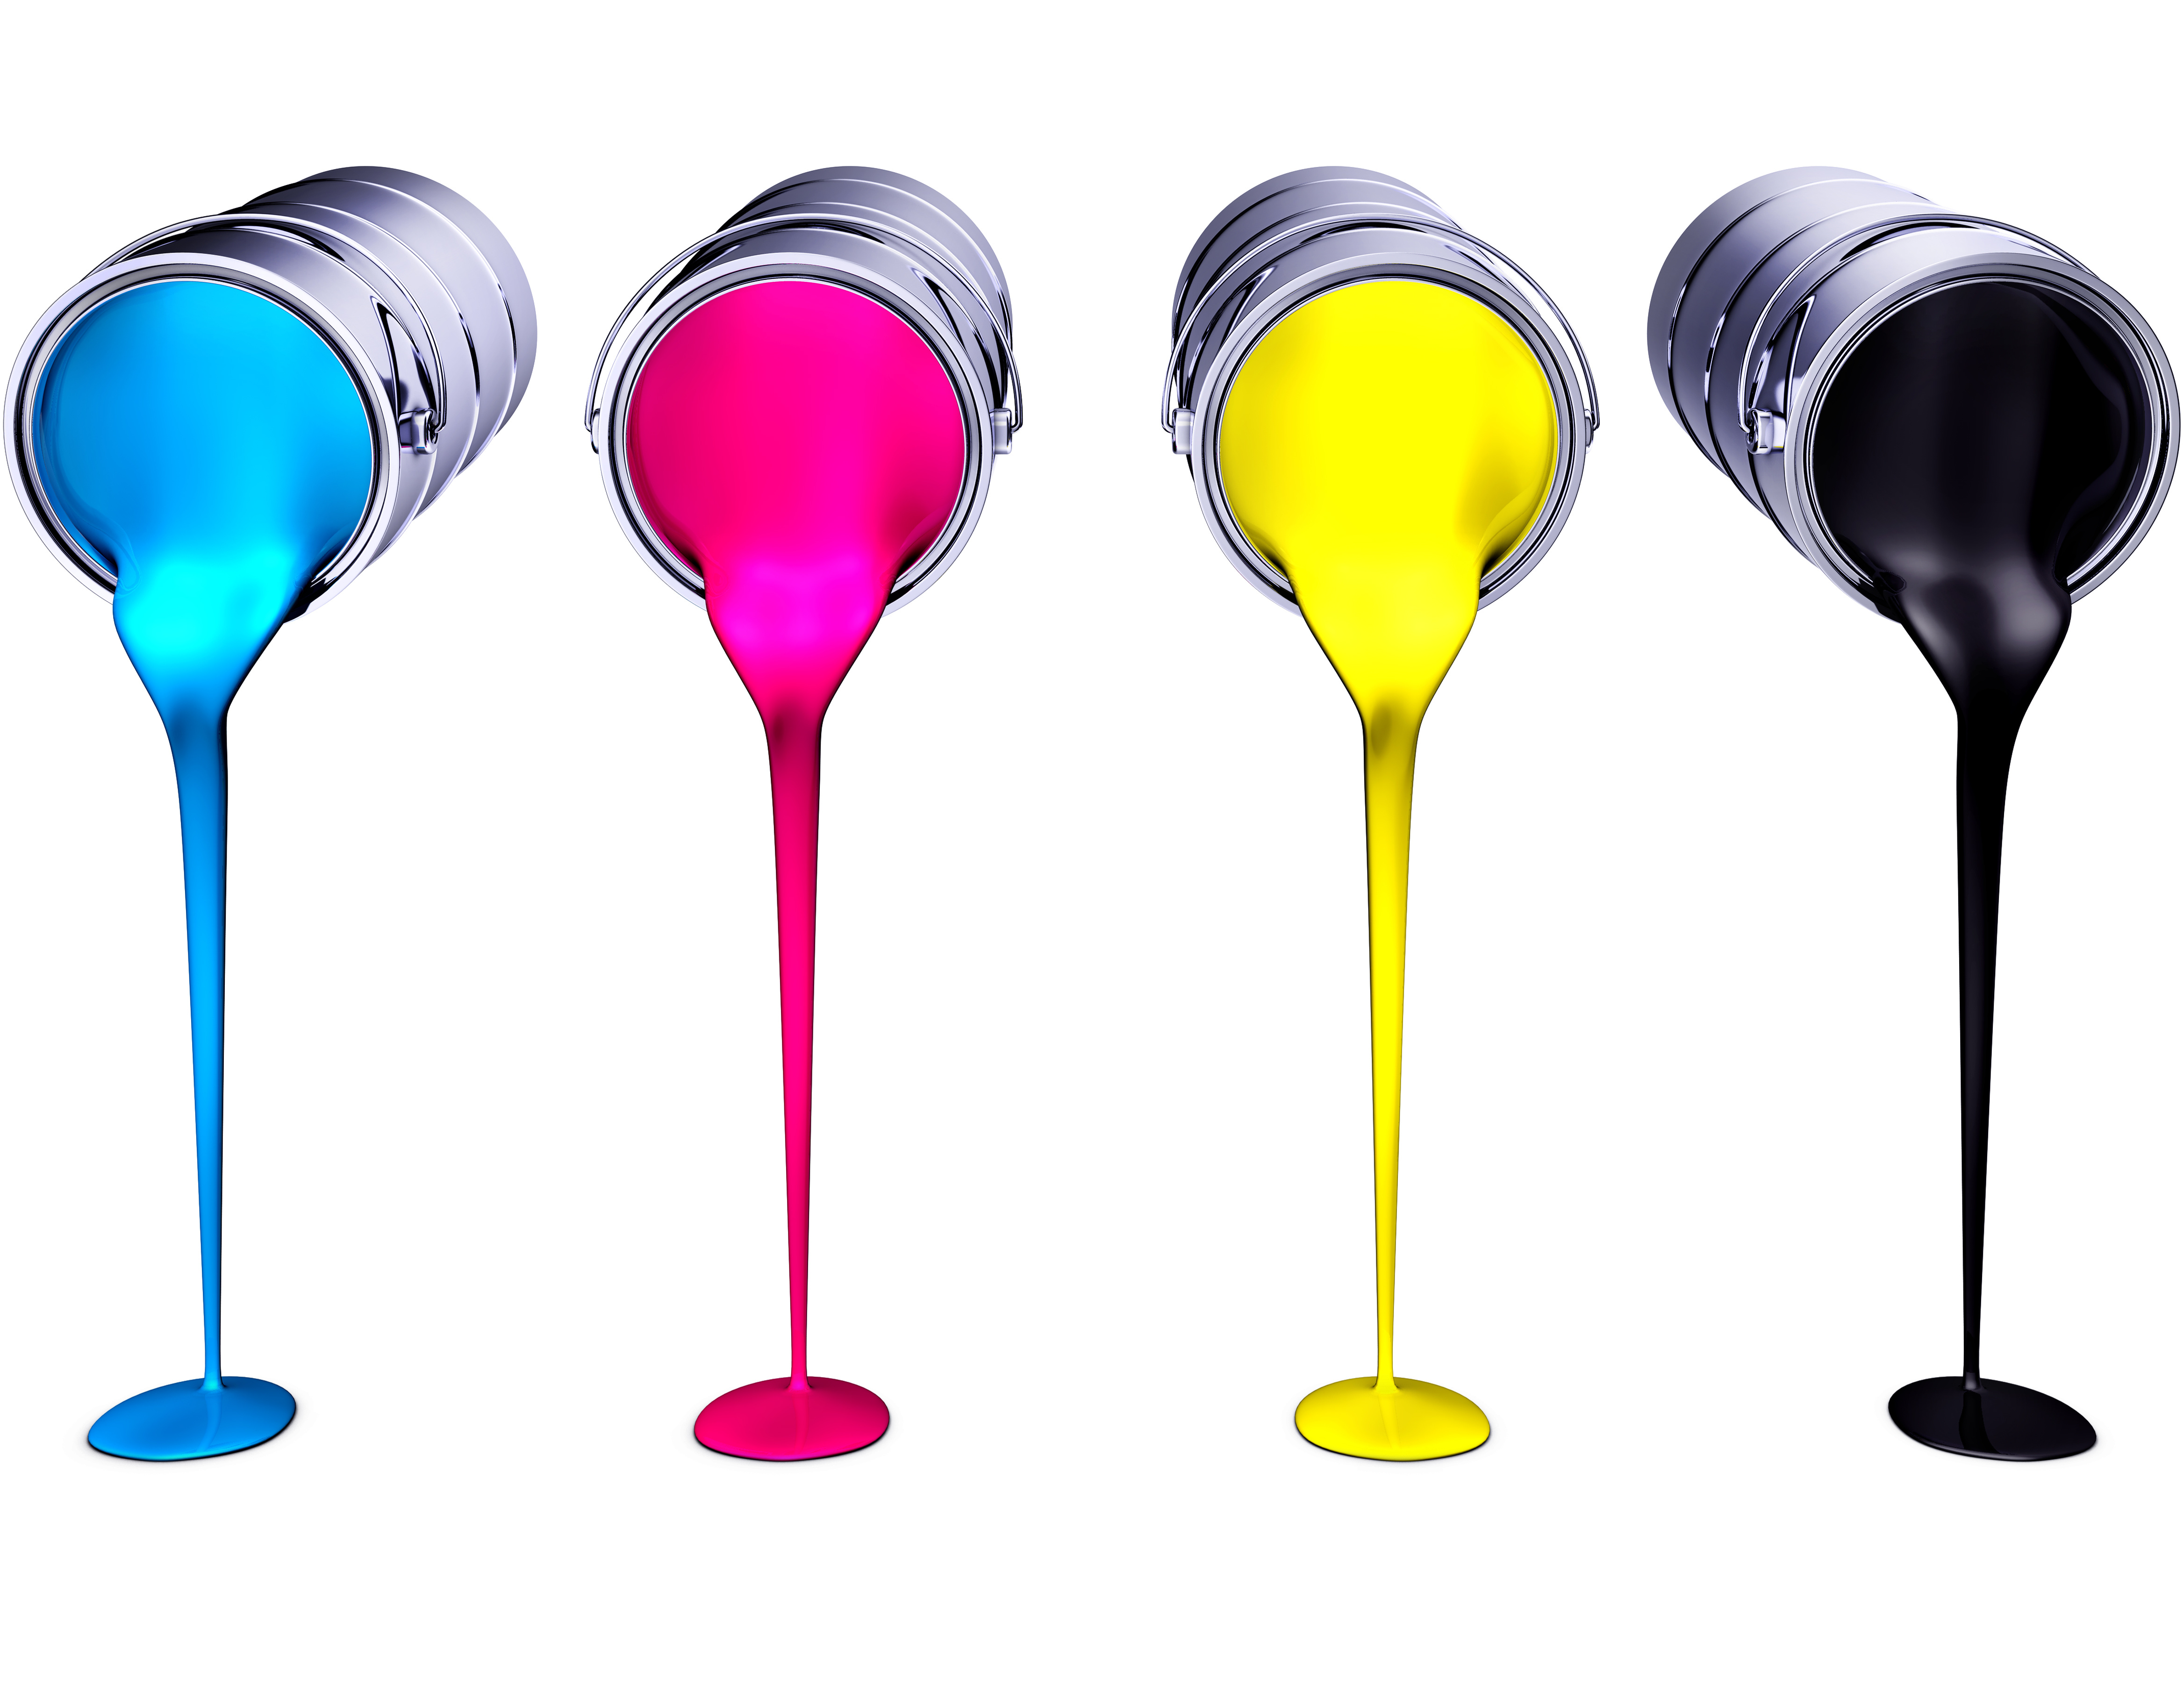 CMYK or 4-color Process Printing